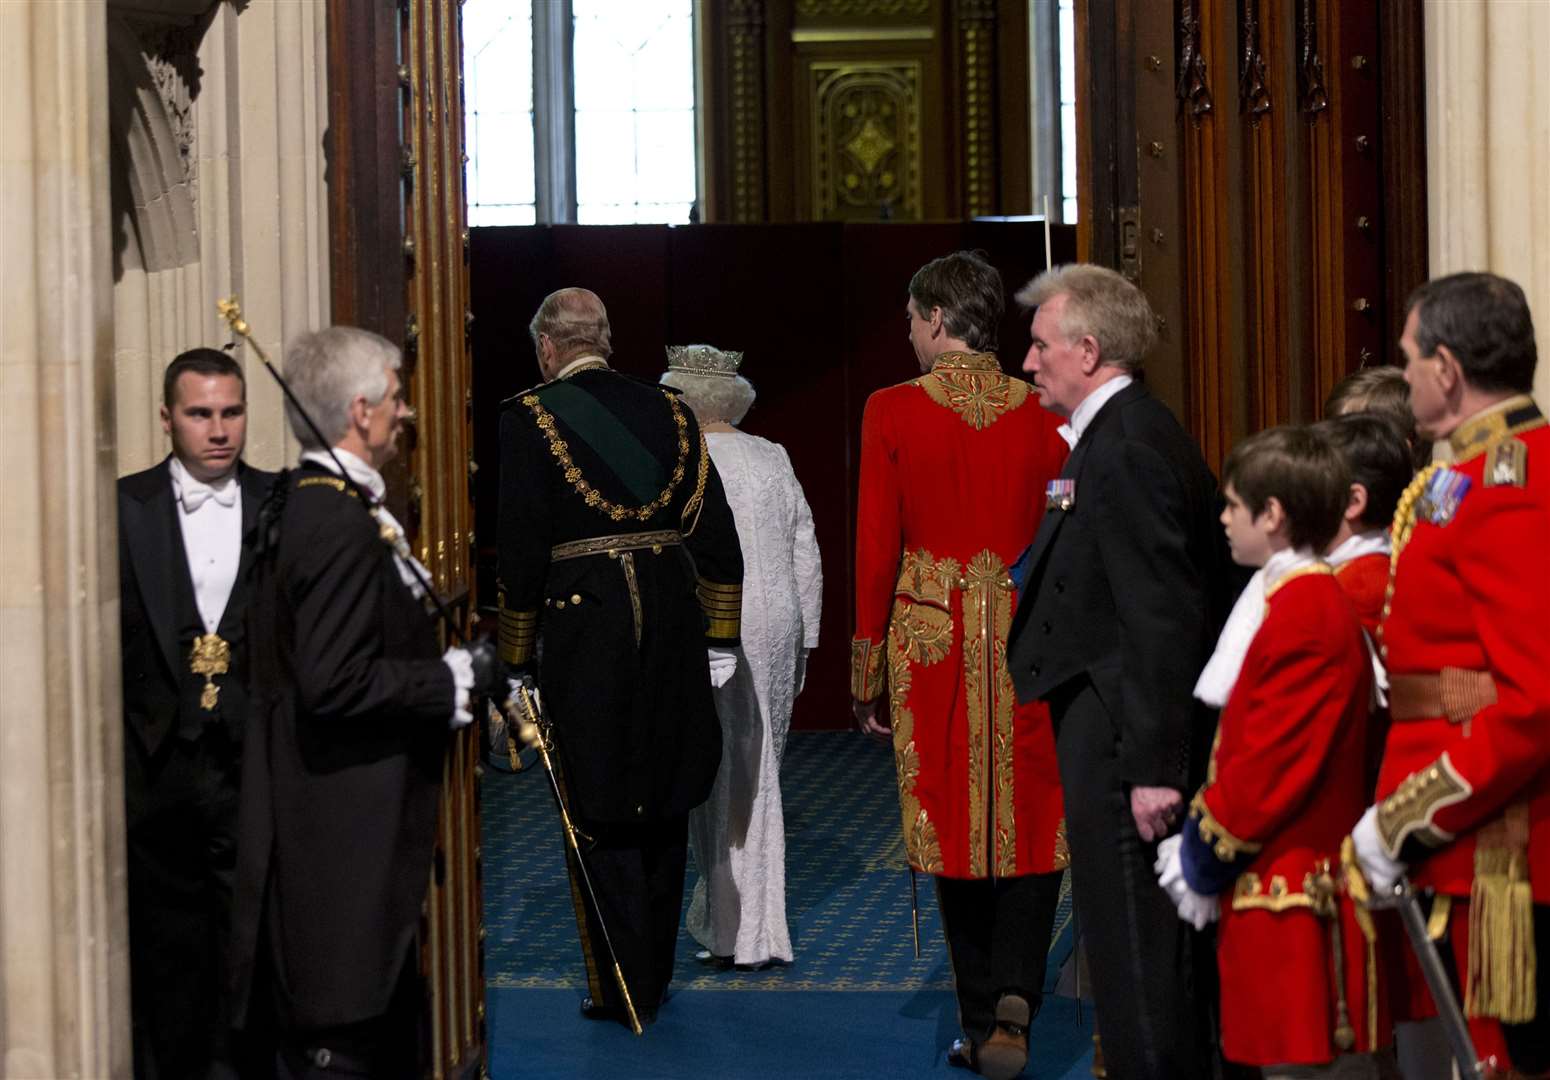 The Queen and the Duke of Edinburgh walk through to the Robing Room, after using a lift, rather than stairs, at the State Opening of Parliament (Yui Mok/PA)